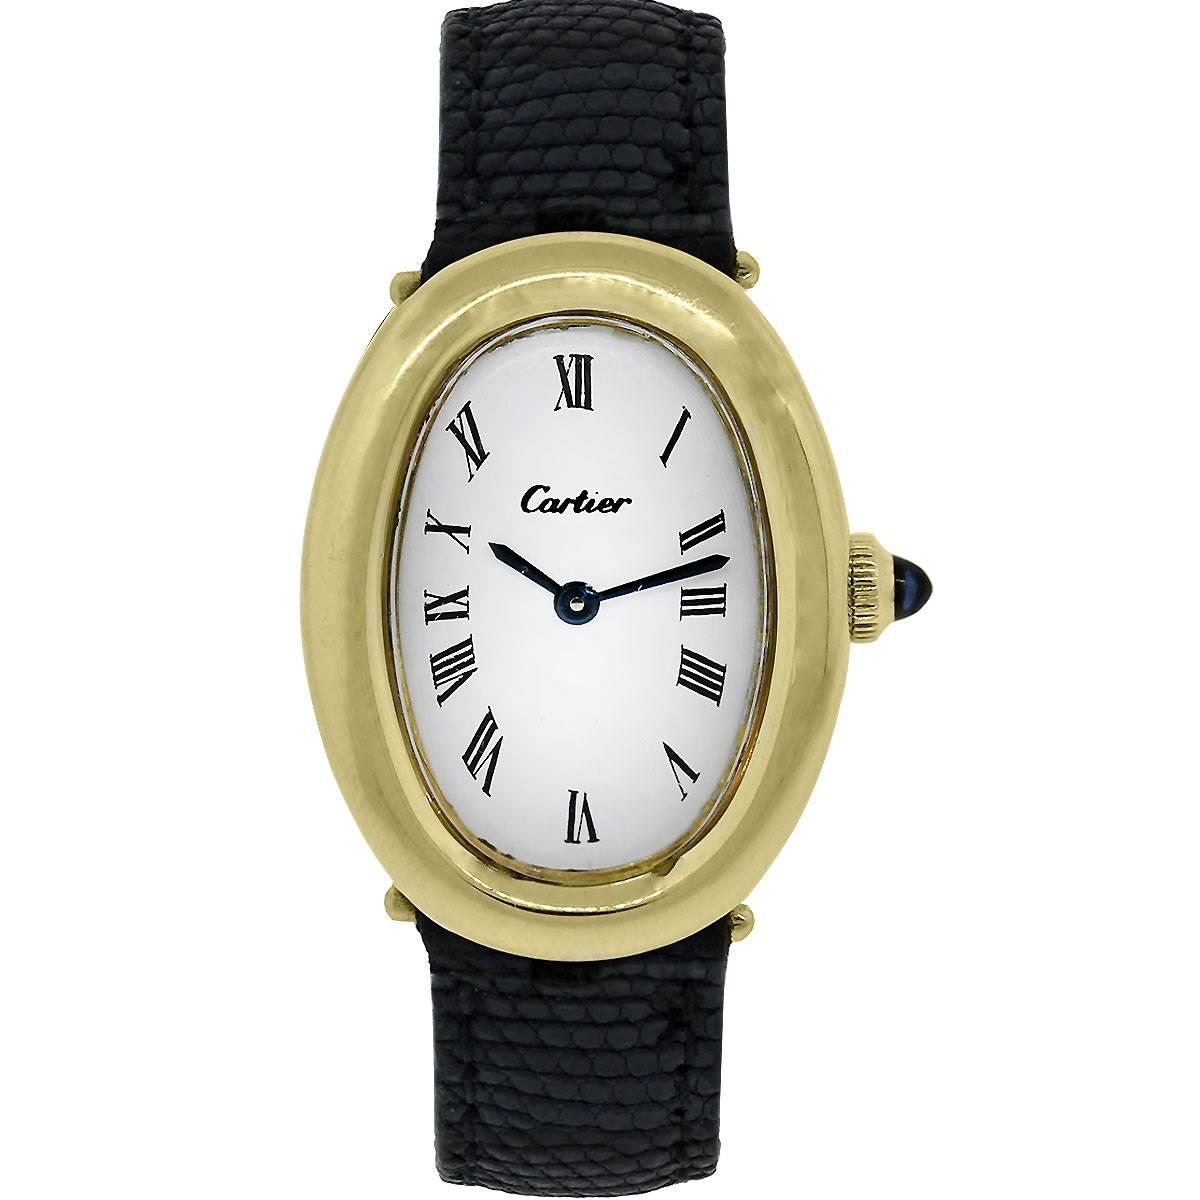 Brand: Cartier
Model: Baignoire
Material: 18k Yellow Gold
Case Measurements: 23mm x 18mm
Dial: White Dial with Roman Numeral Dial Markers; Blue Steel Hands
Bezel: 18k Yellow Gold
Crystal: Scratch Resistant Sapphire
Bracelet: Leather, bracelet shows